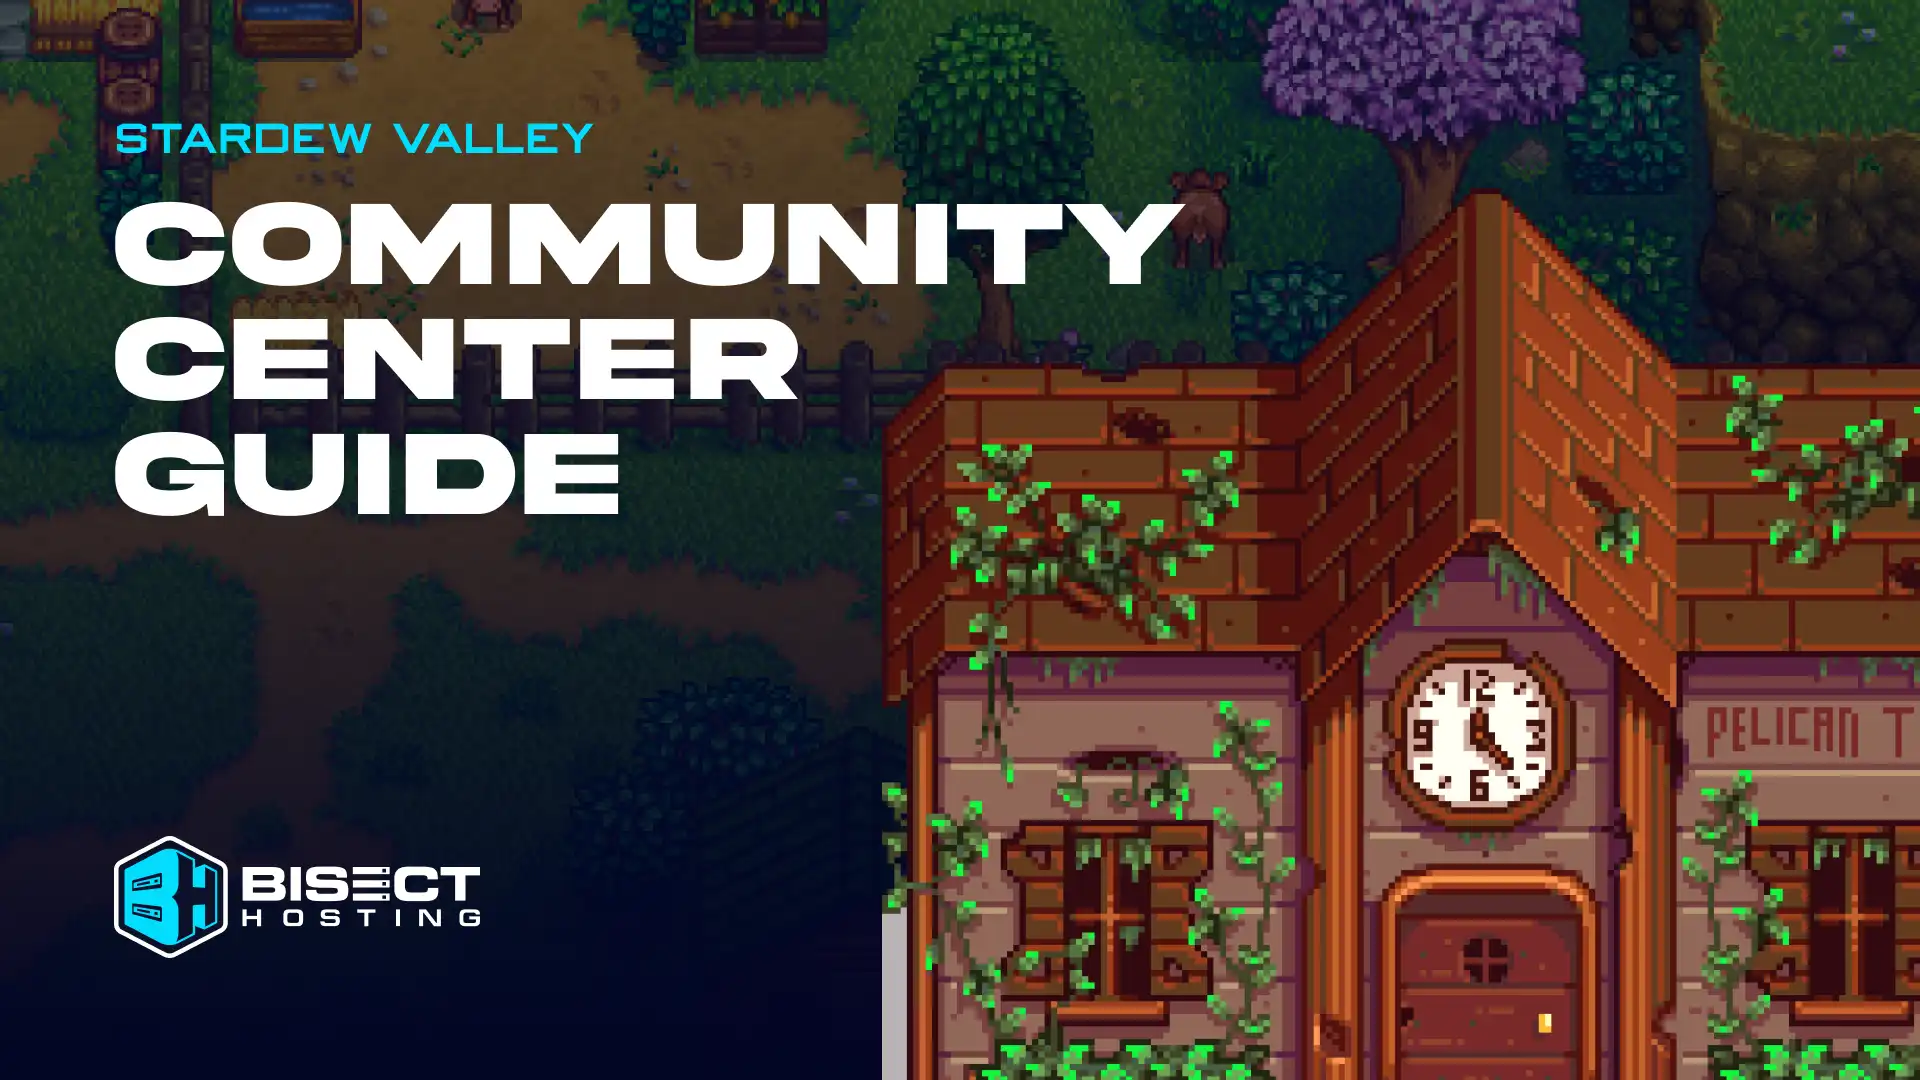 Stardew Valley Community Center Guide: How to Unlock, Bundles, and More